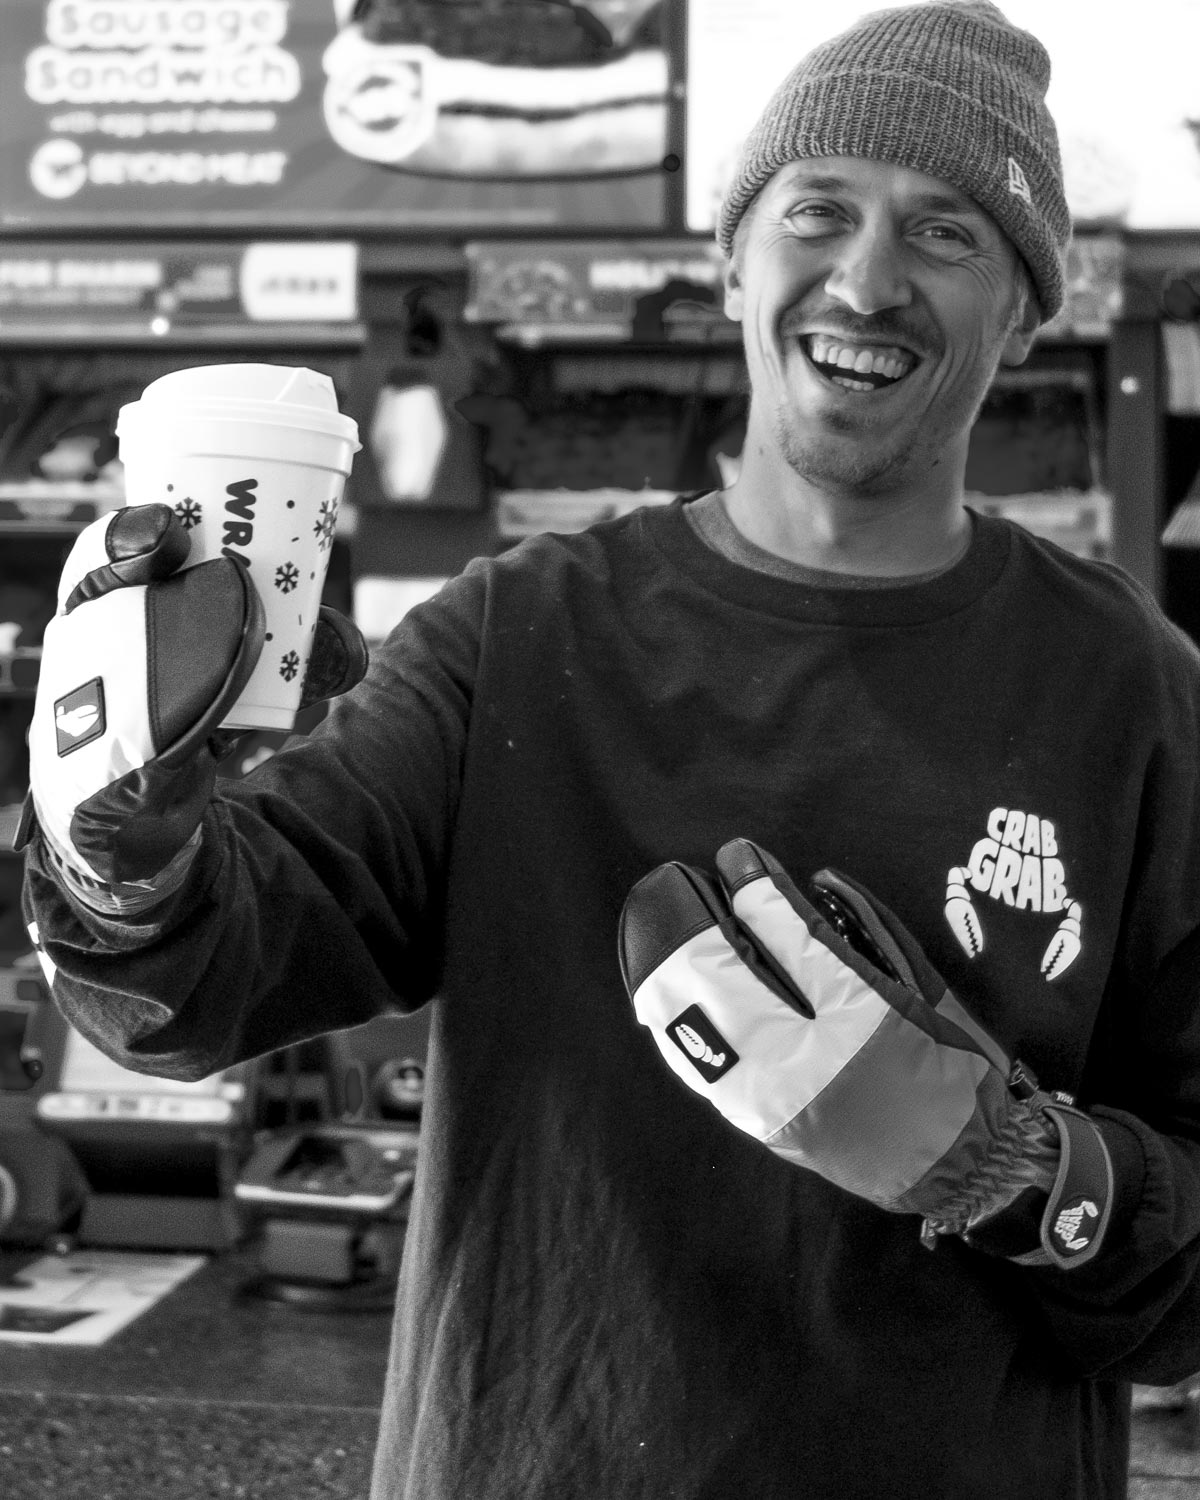 Team rider Chris Grenier protecting his hands from hot Dunkin' with the Freak Trigger mitts